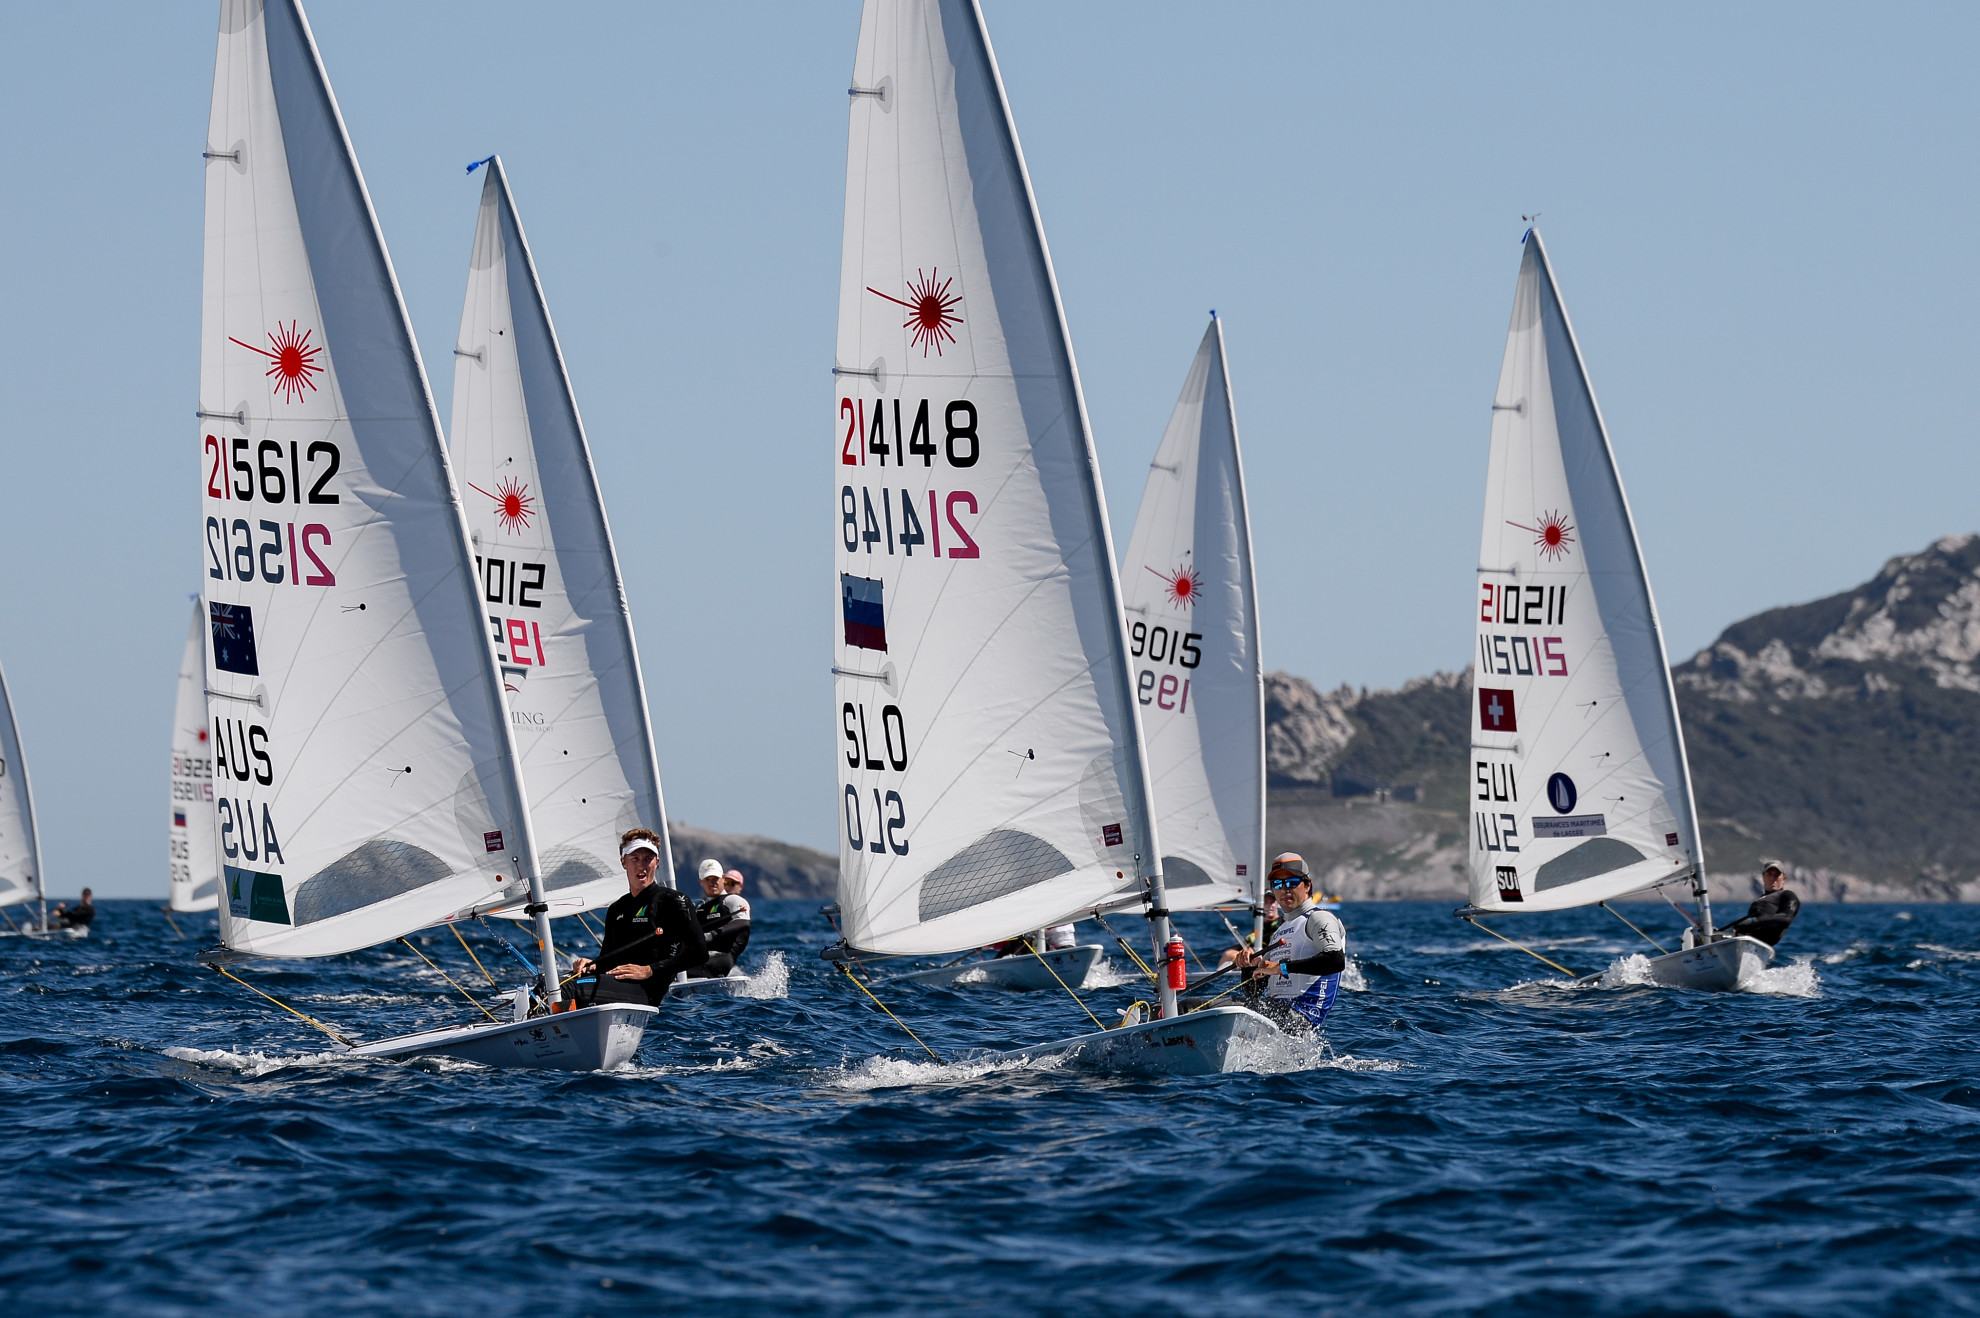  Olympic Classes  Semaine Olympique  Hyeres FRA  Buckingham and Barnard USA on 12 and 13 in the Standards, Railey 23rd in the Radials after 2 races.